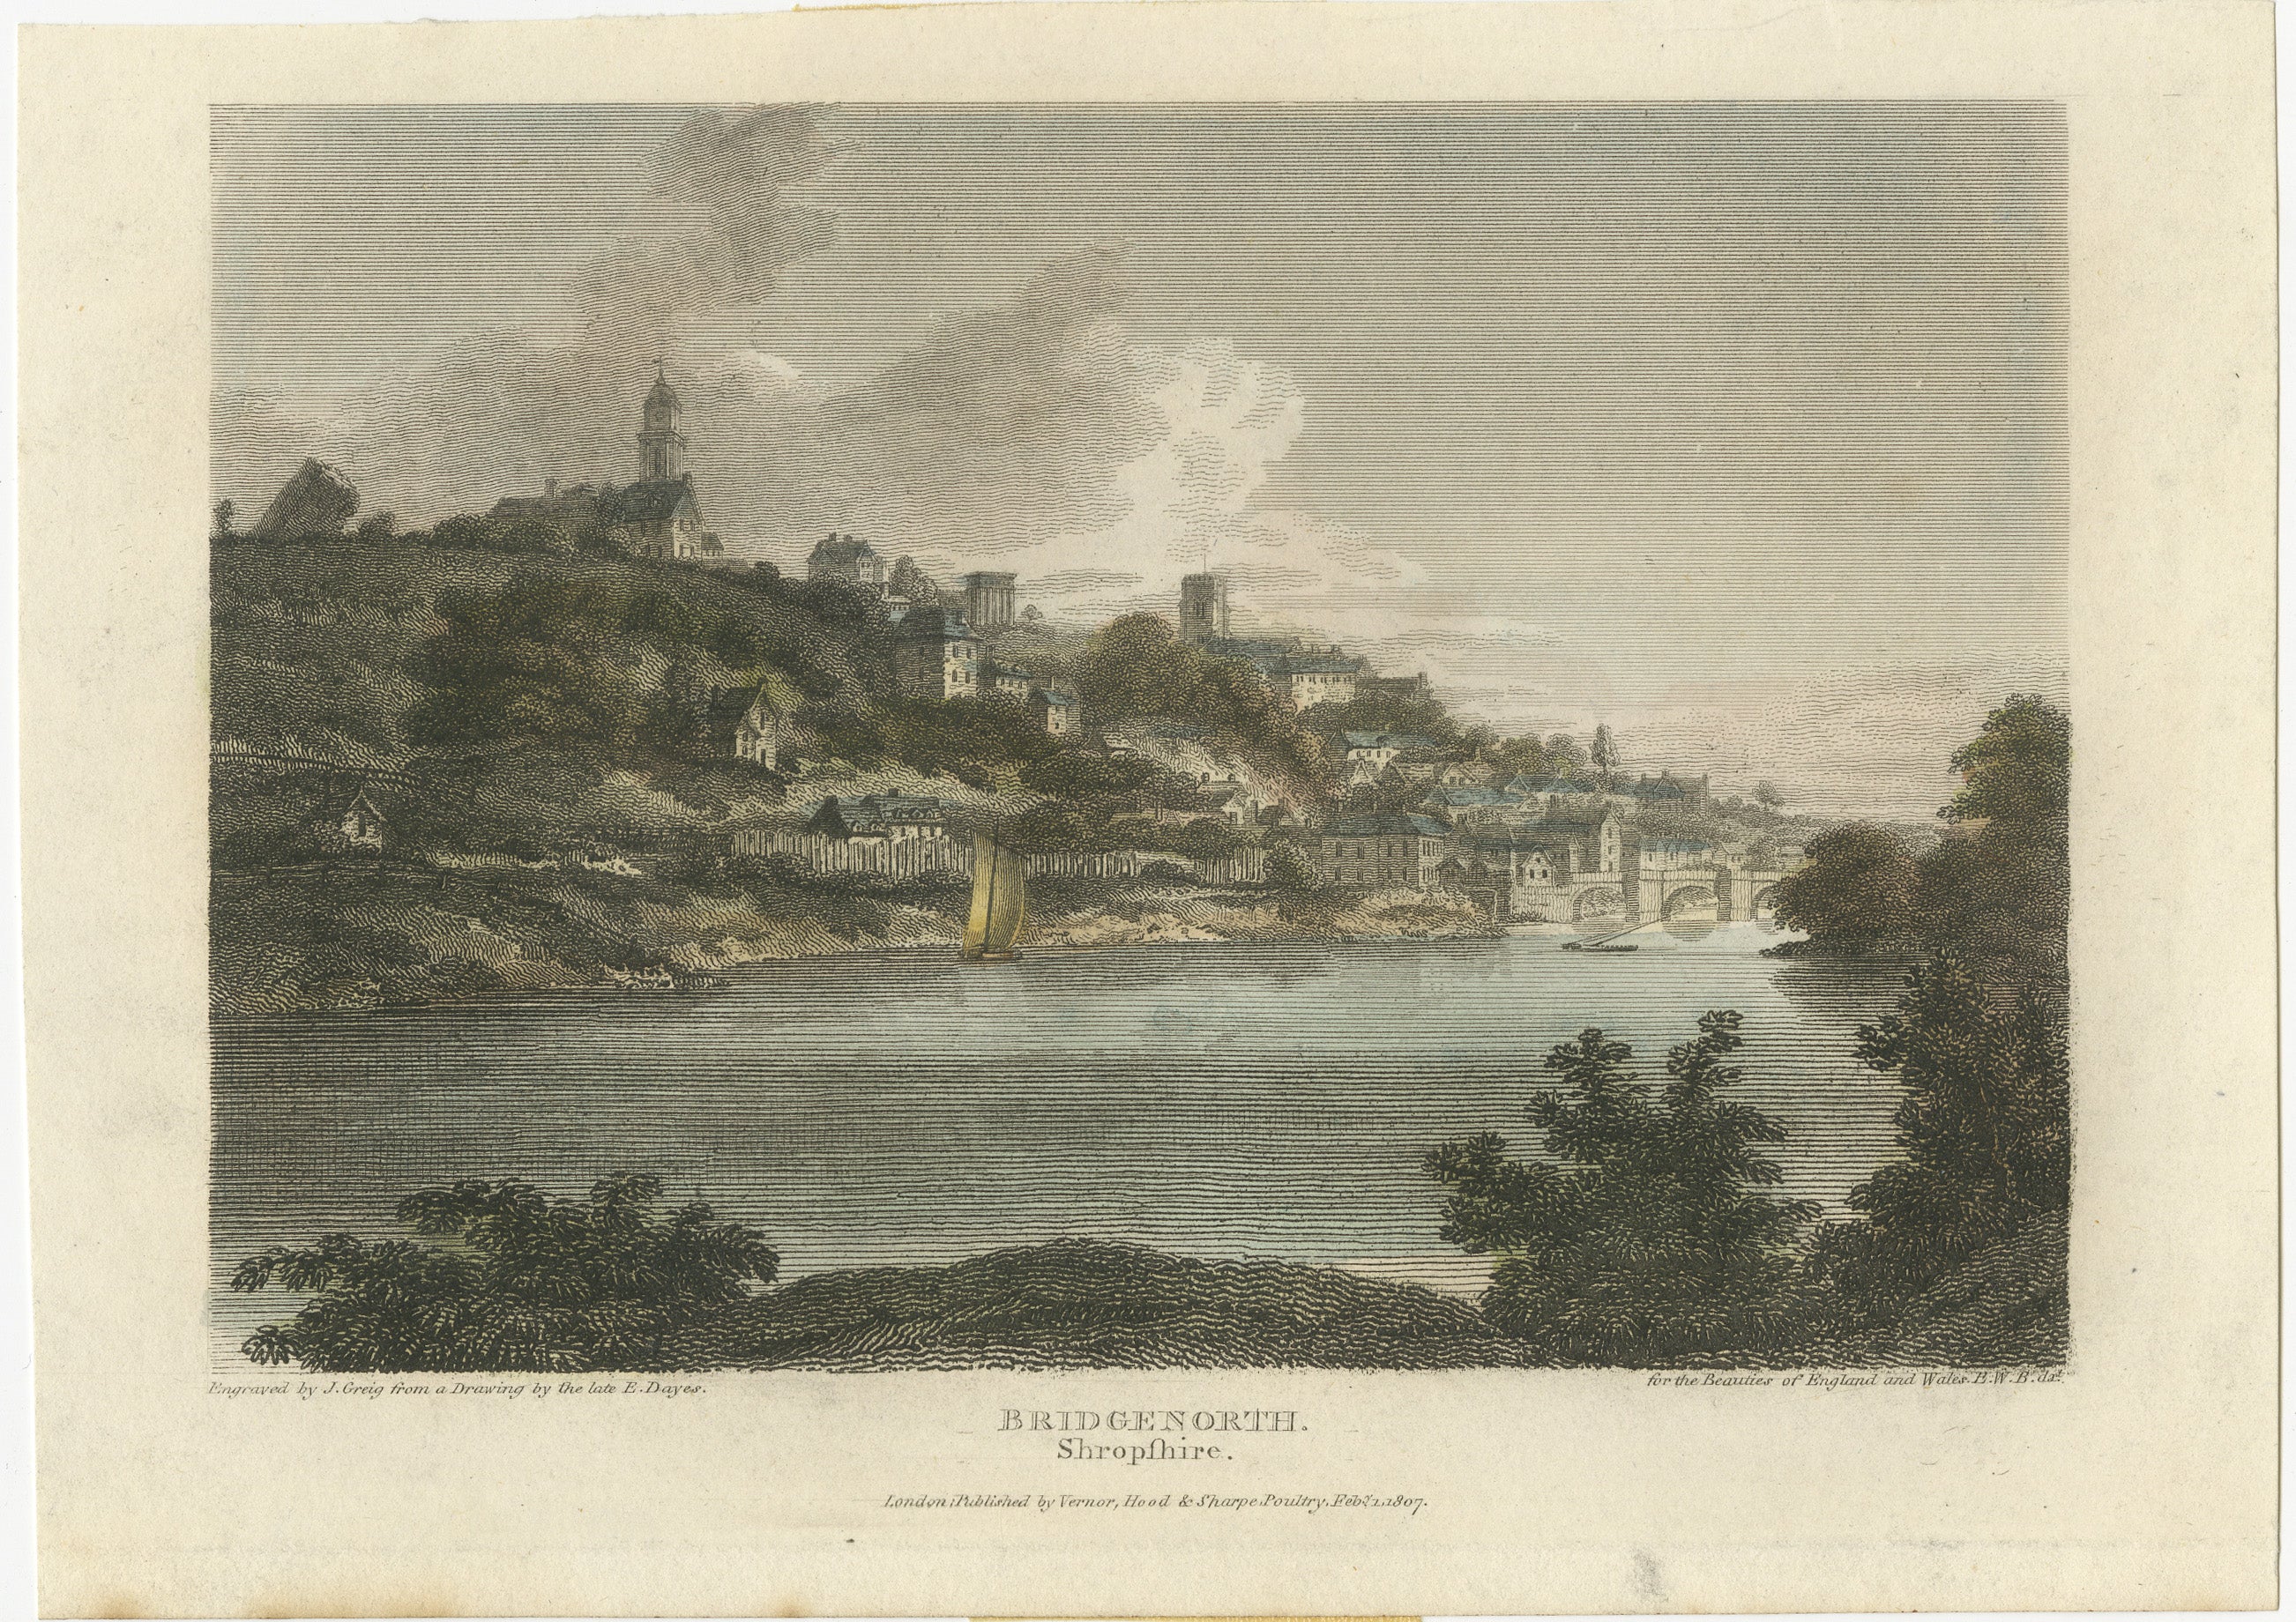 This engraving is part of a collection showcasing the beauty of England and Wales, a series that was common in the 18th and 19th centuries to celebrate and document the picturesque landscapes and significant towns of Britain.

The text provided in